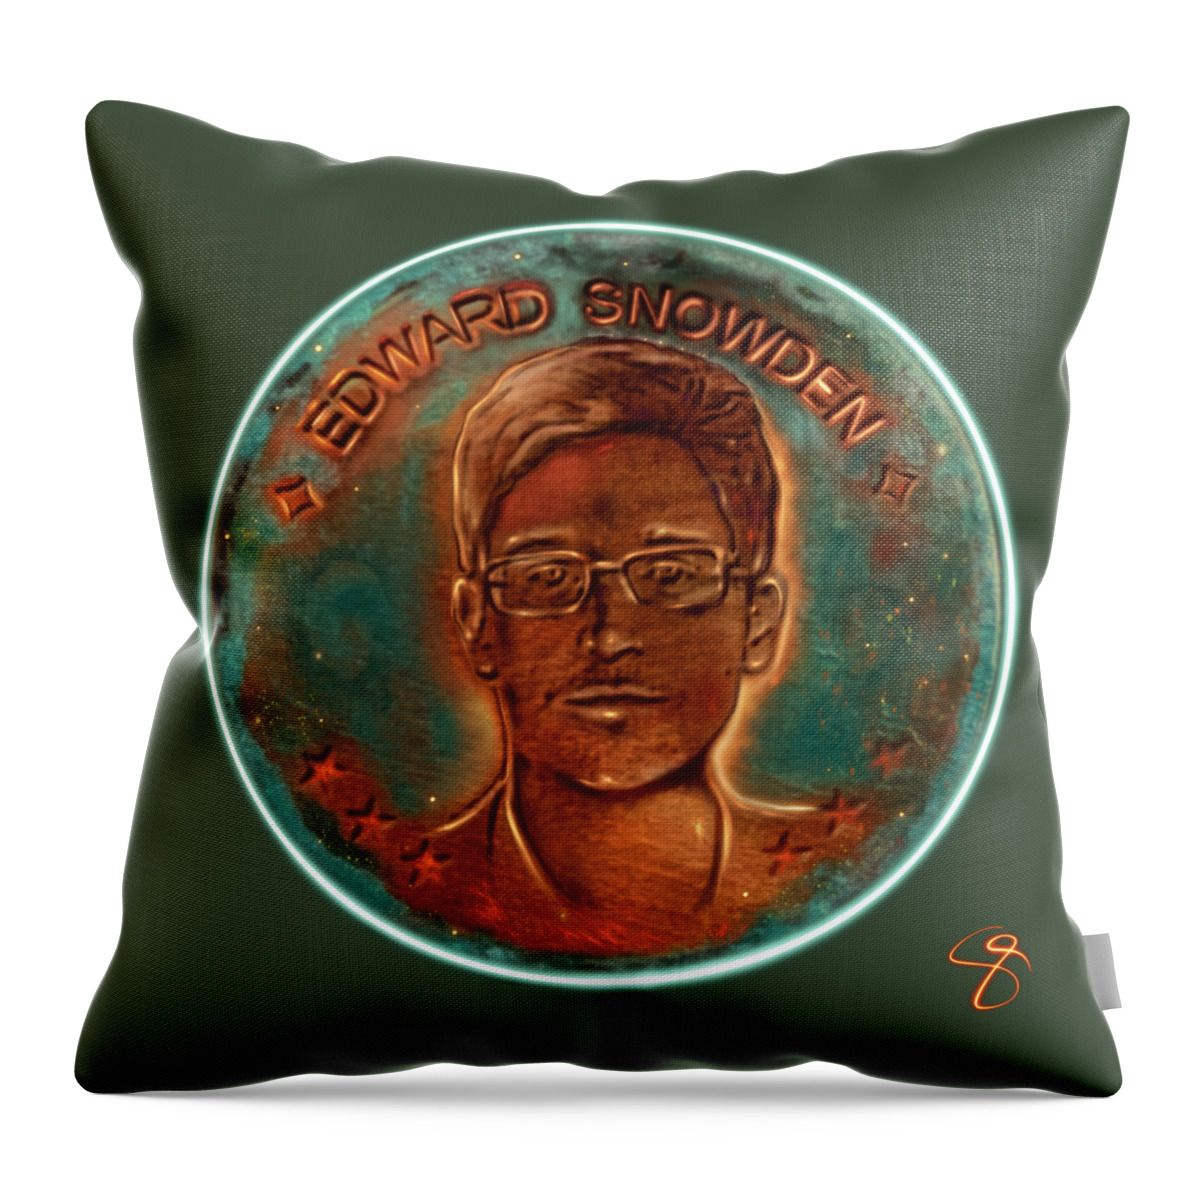 Wunderle Art Throw Pillow featuring the mixed media Edward Snowden by Wunderle